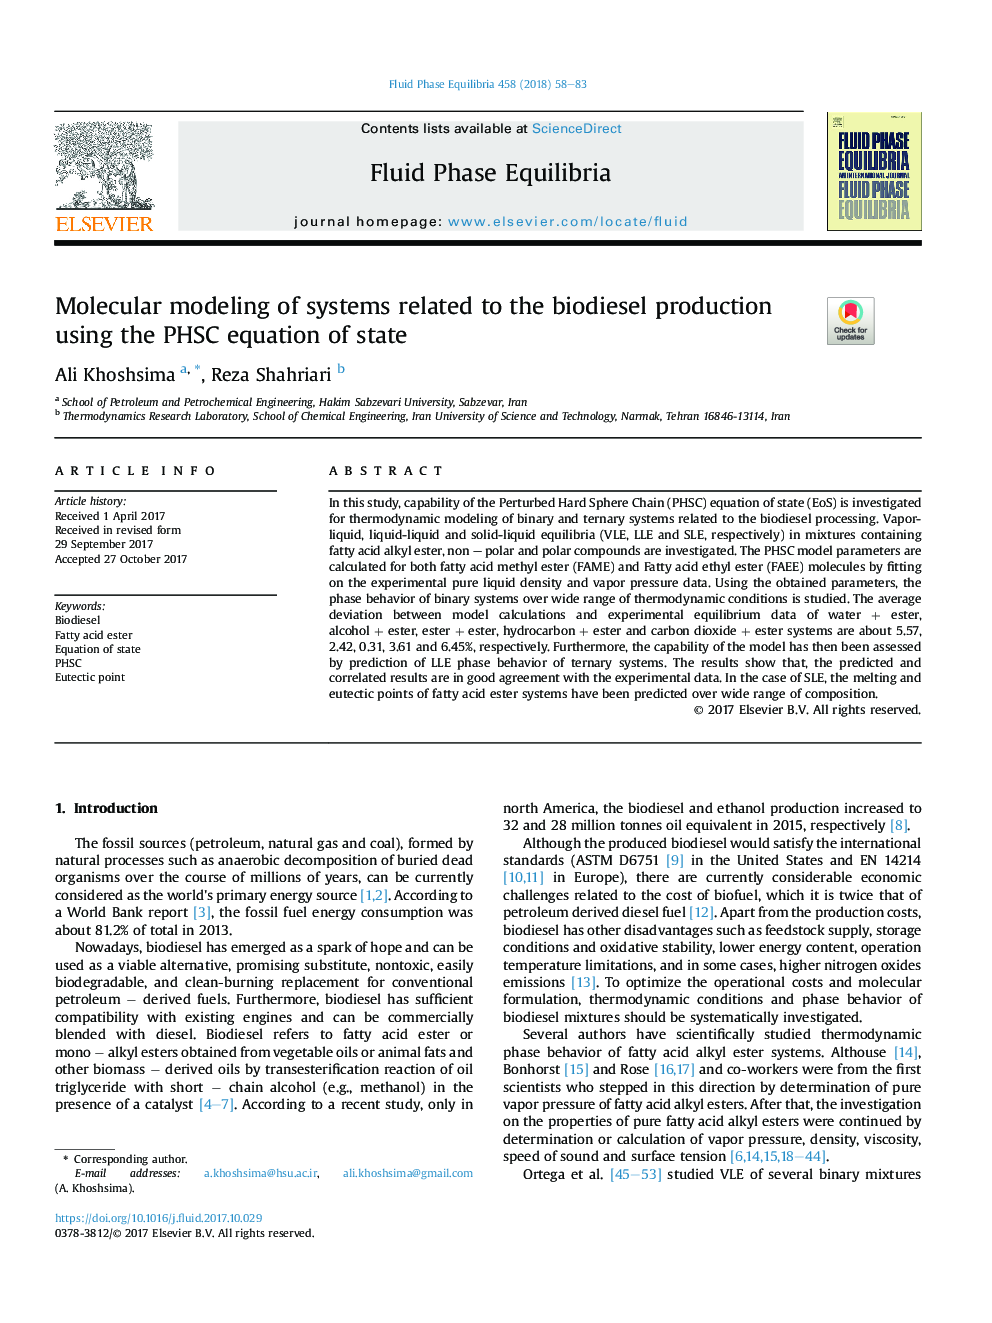 Molecular modeling of systems related to the biodiesel production using the PHSC equation of state